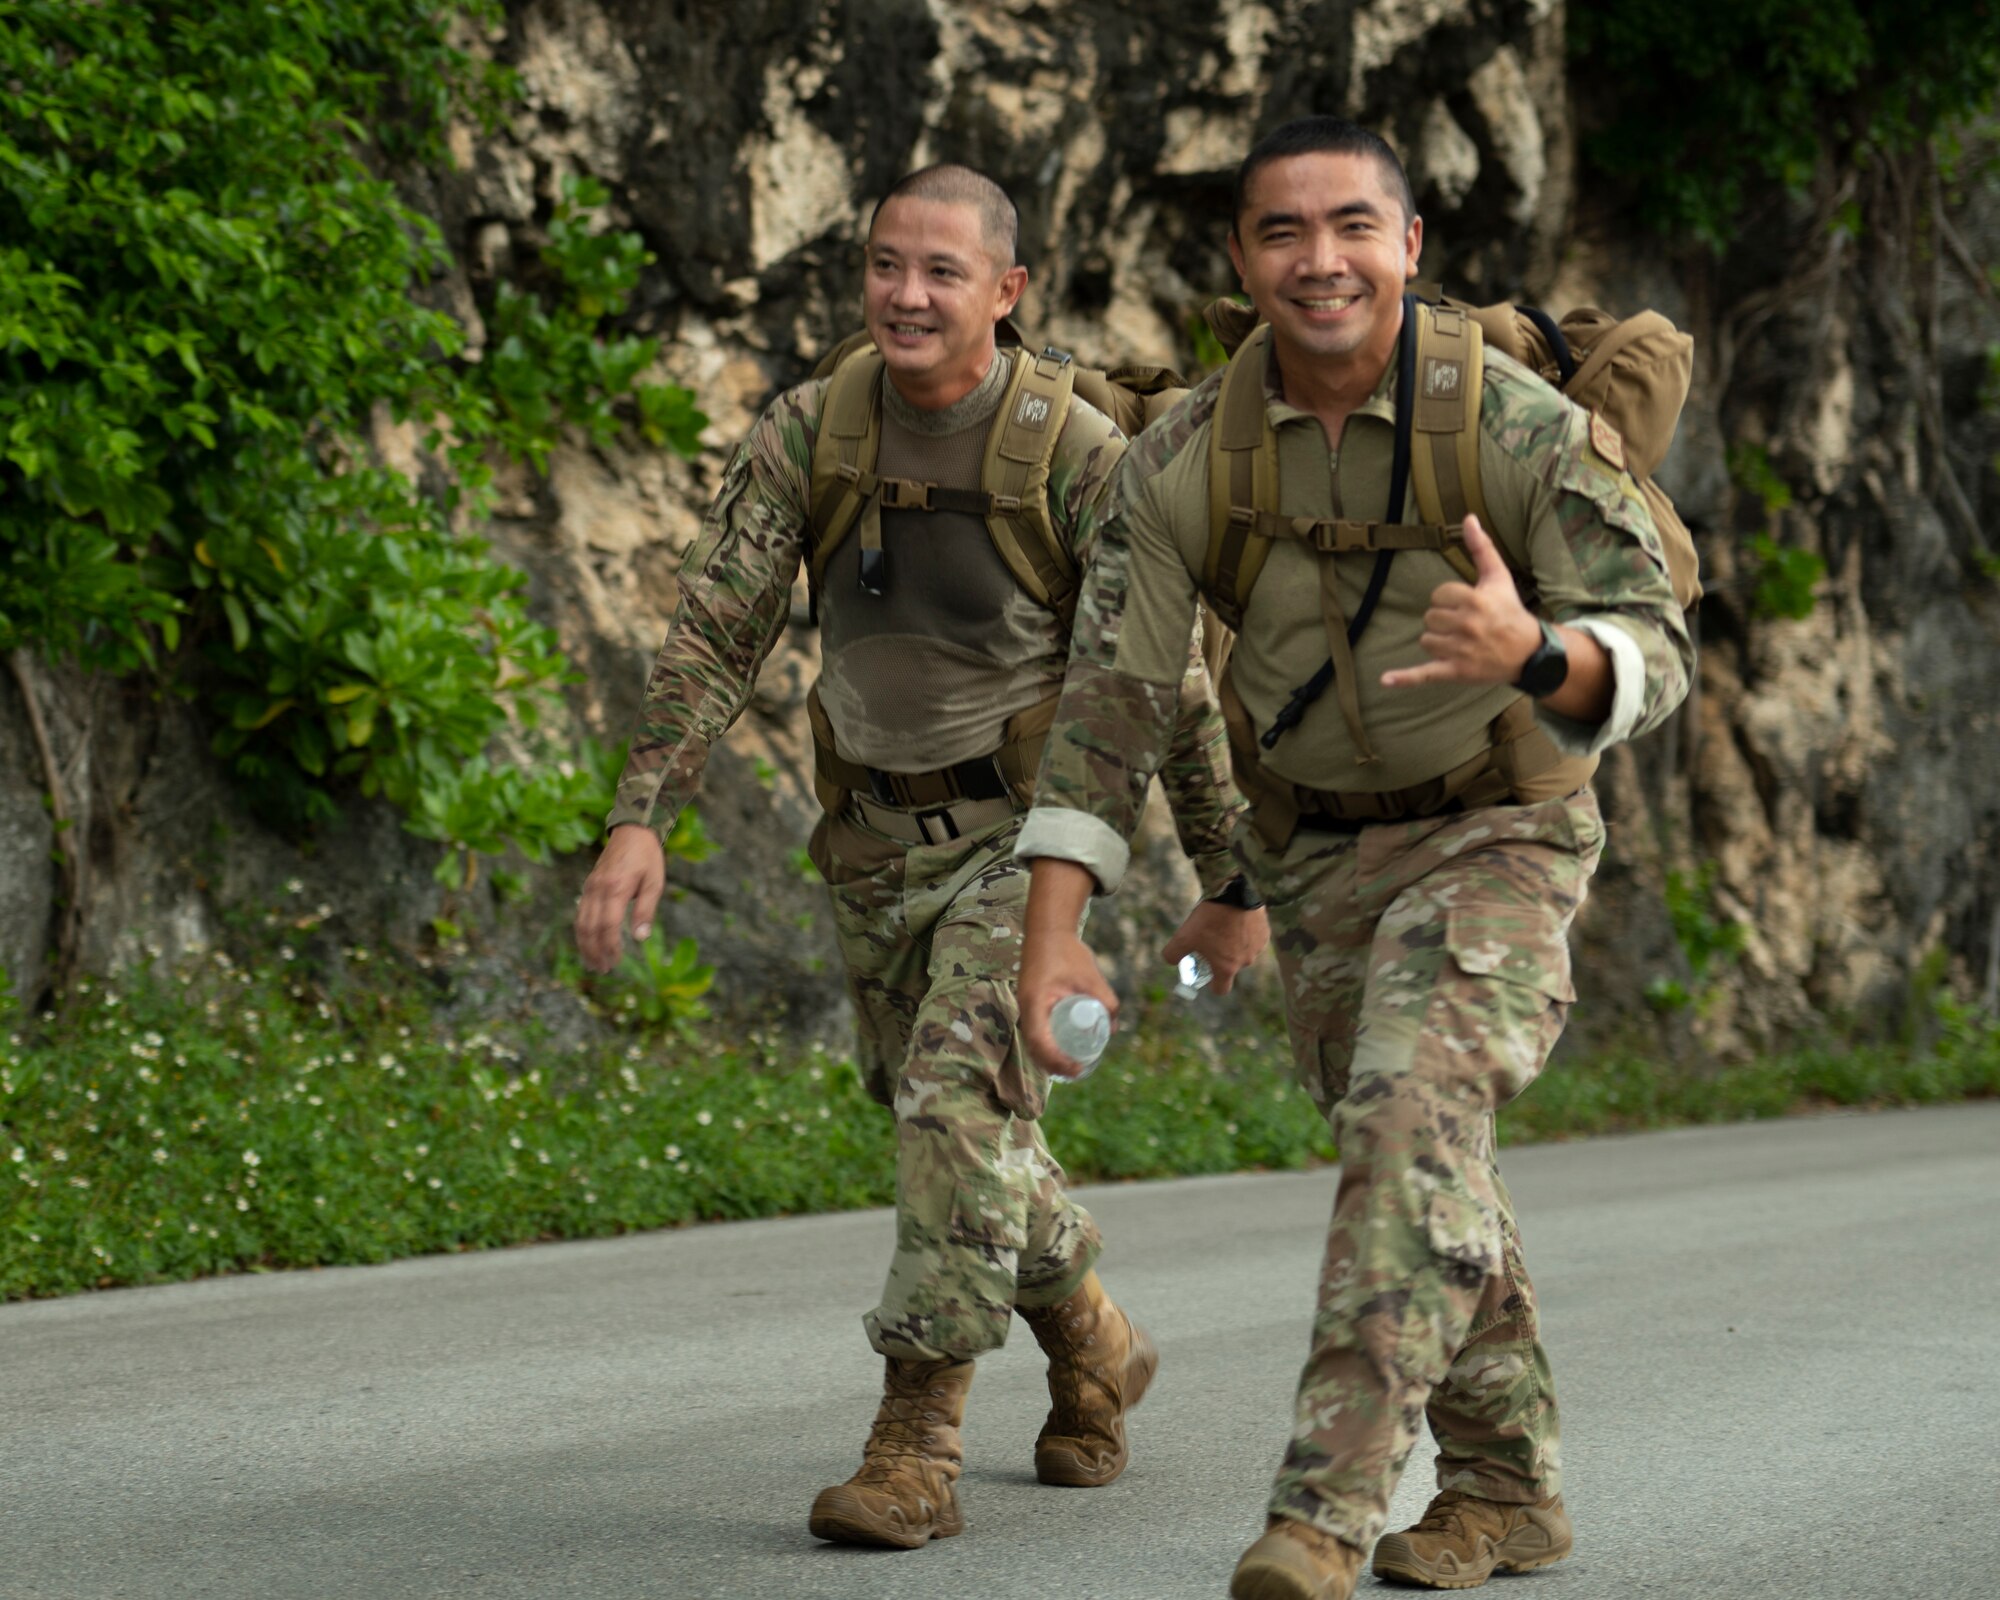 U.S. Air Force service members walk up Sanders Slope during the Office of Special Investigations’ Hustler-6 memorial event on Andersen Air Force Base, Guam, Dec. 21, 2022. Since 2016, OSI agents assigned to Andersen AFB have annually honored the Hustler-6, who lost their lives during a mission near Bagram, Afghanistan on Dec. 21, 2015, by rucking up and down Sanders Slope. (U.S. Air Force photo by Airman Spencer Perkins)